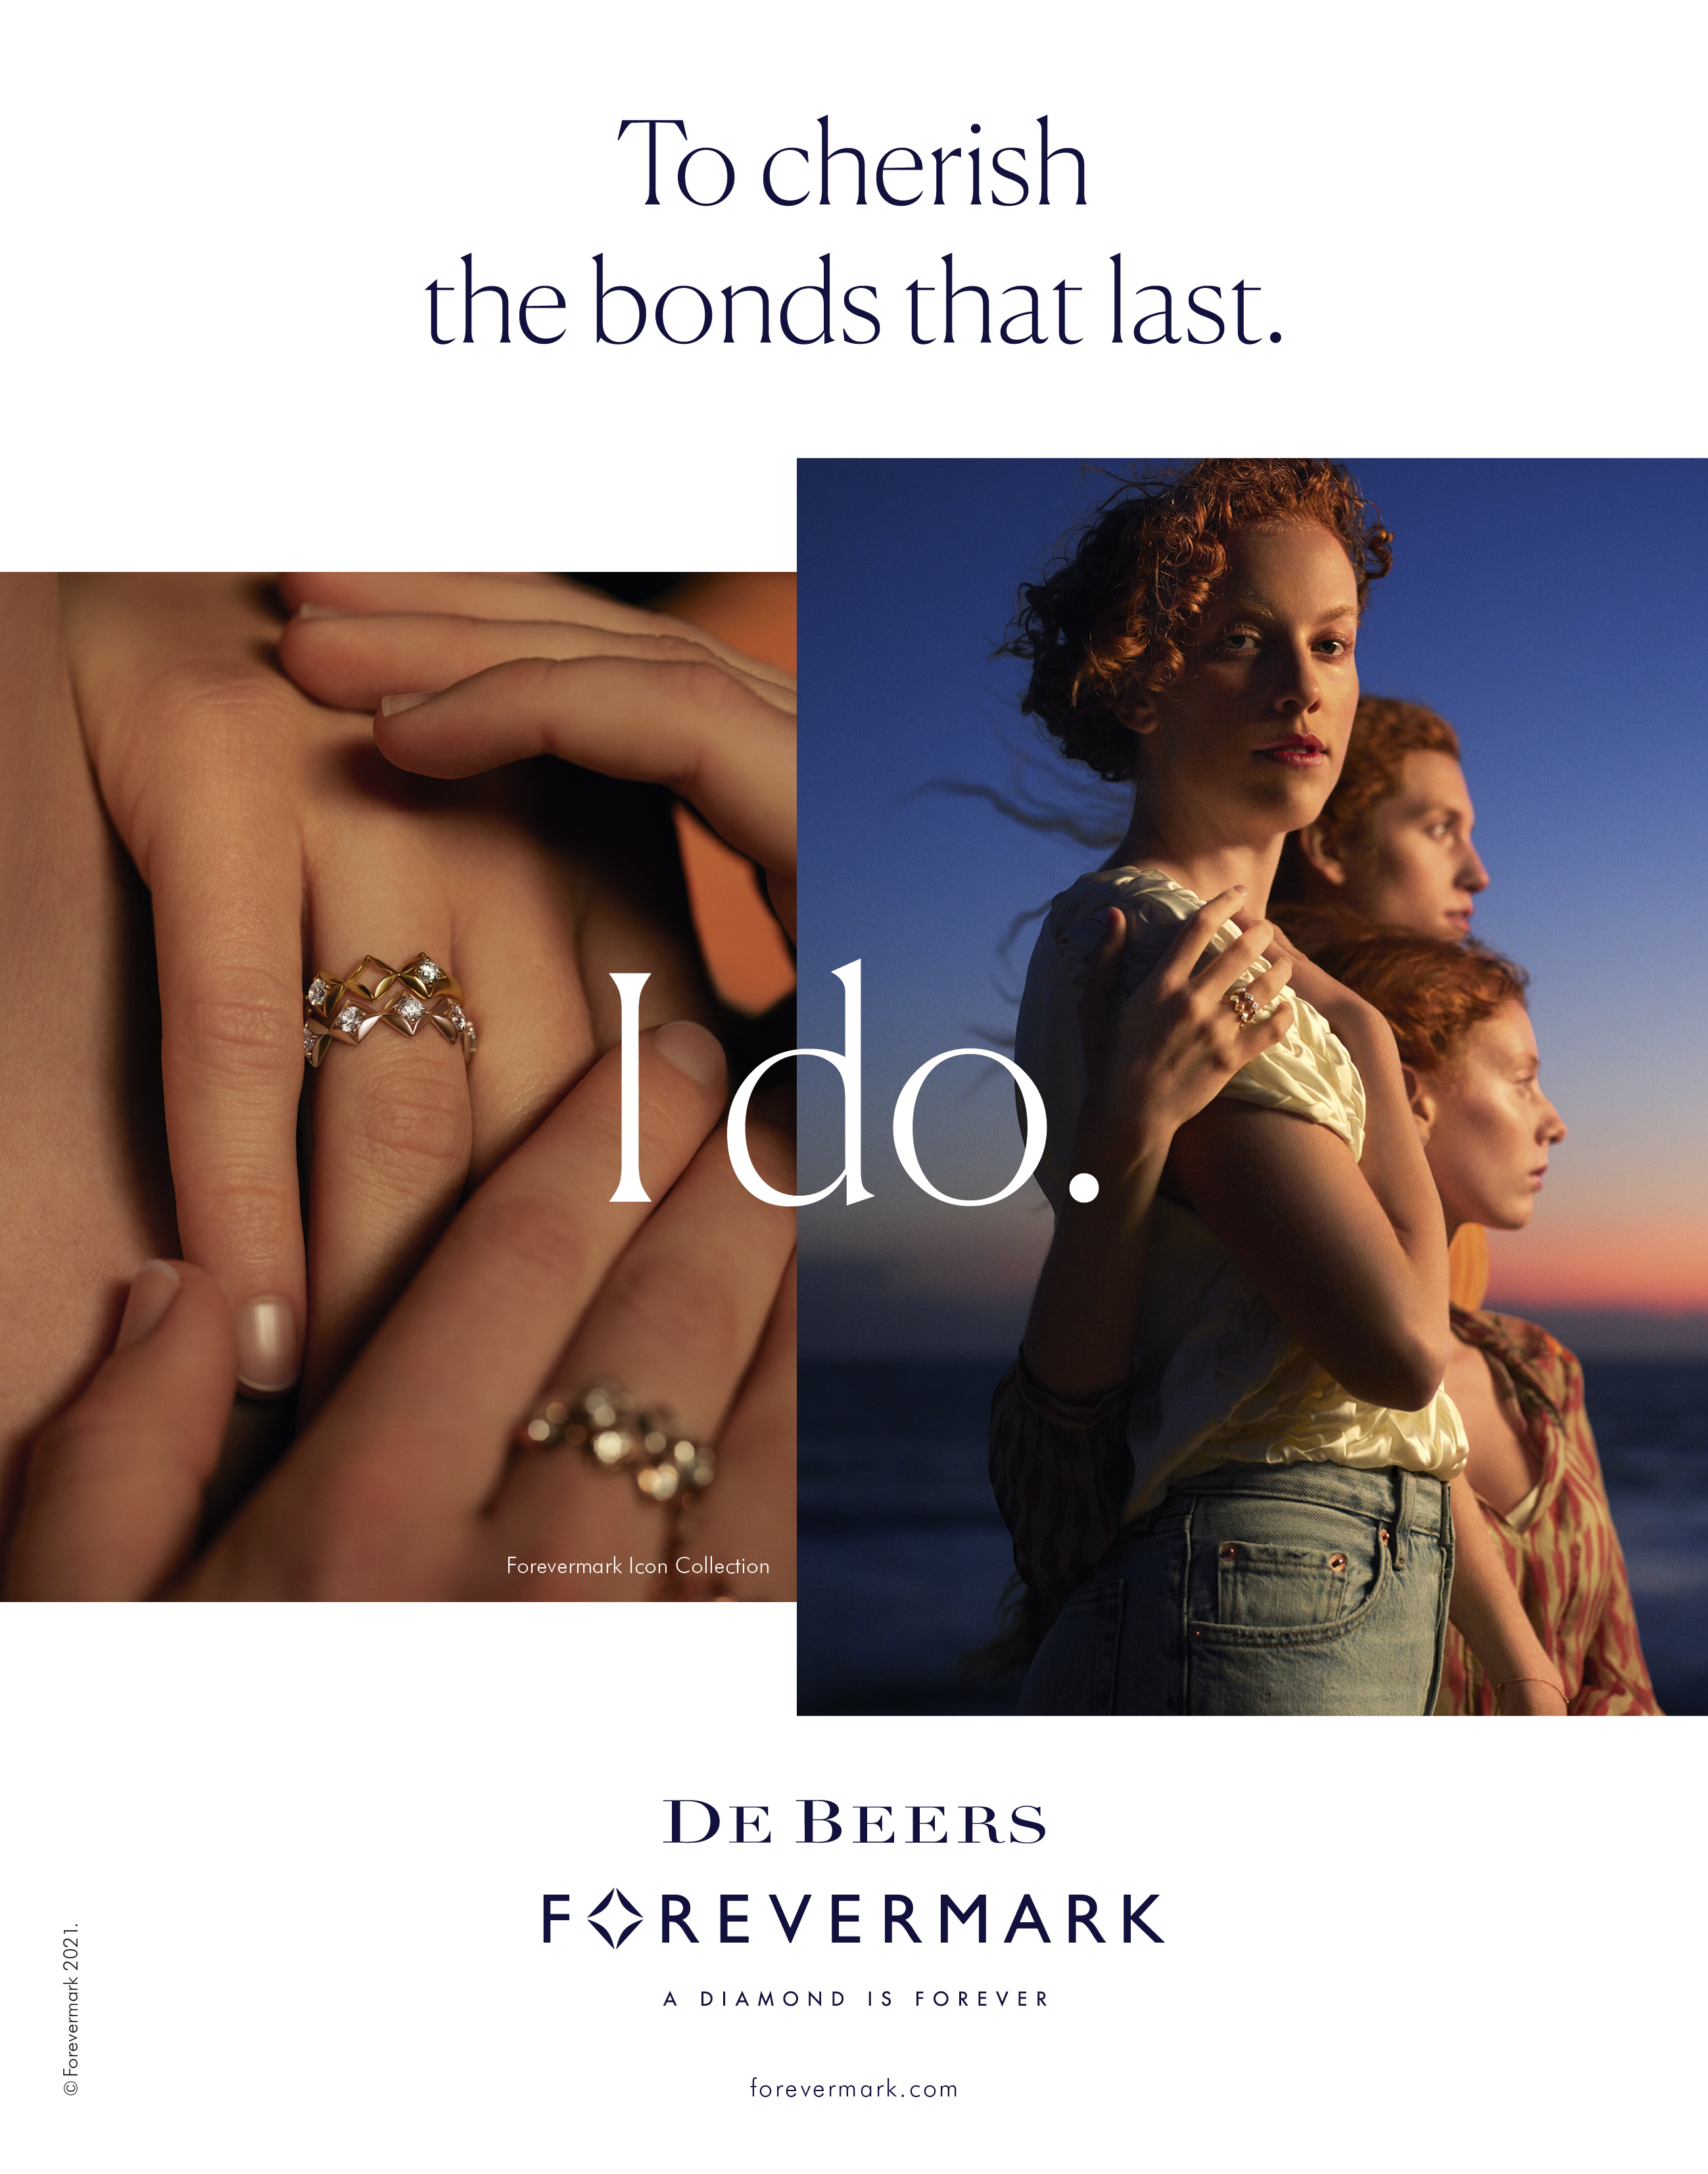 De Beers: 'I do.' • Ads of the World™